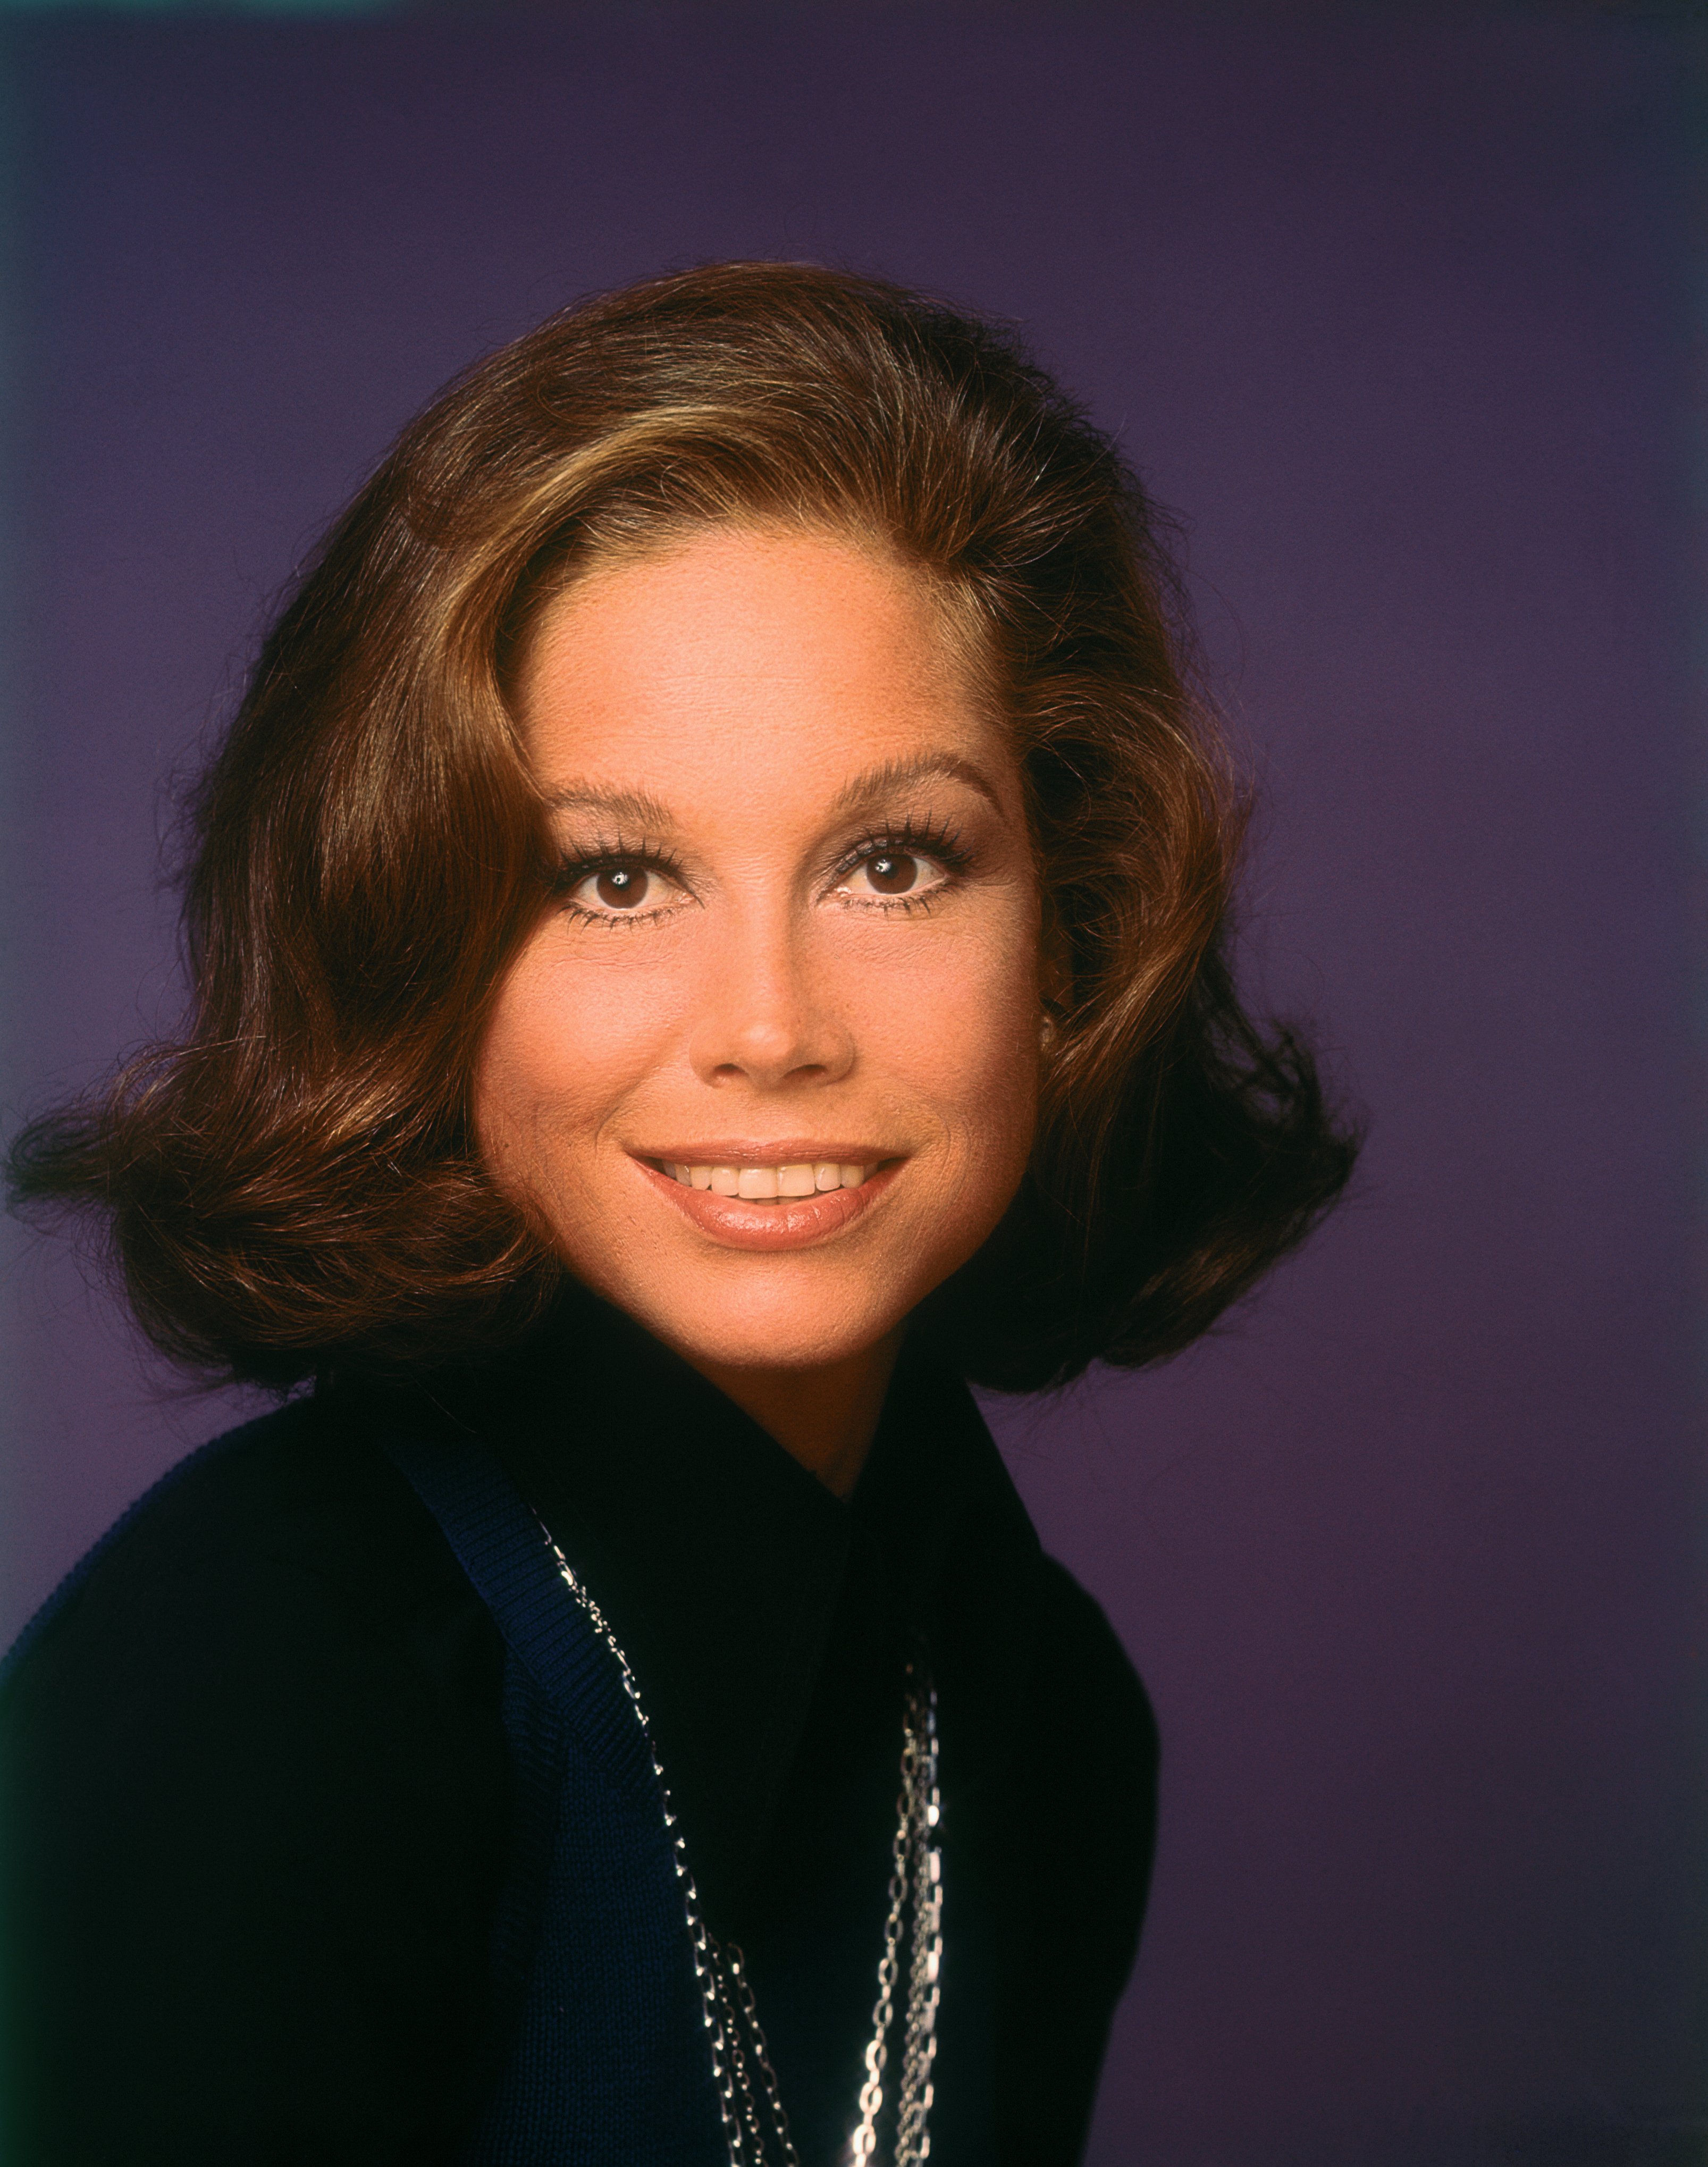 Close-up of smiling actress Mary Tyler Moore who stars in the television series The Mary Tyler Moore Show, circa 1975. | Photo: Getty Images